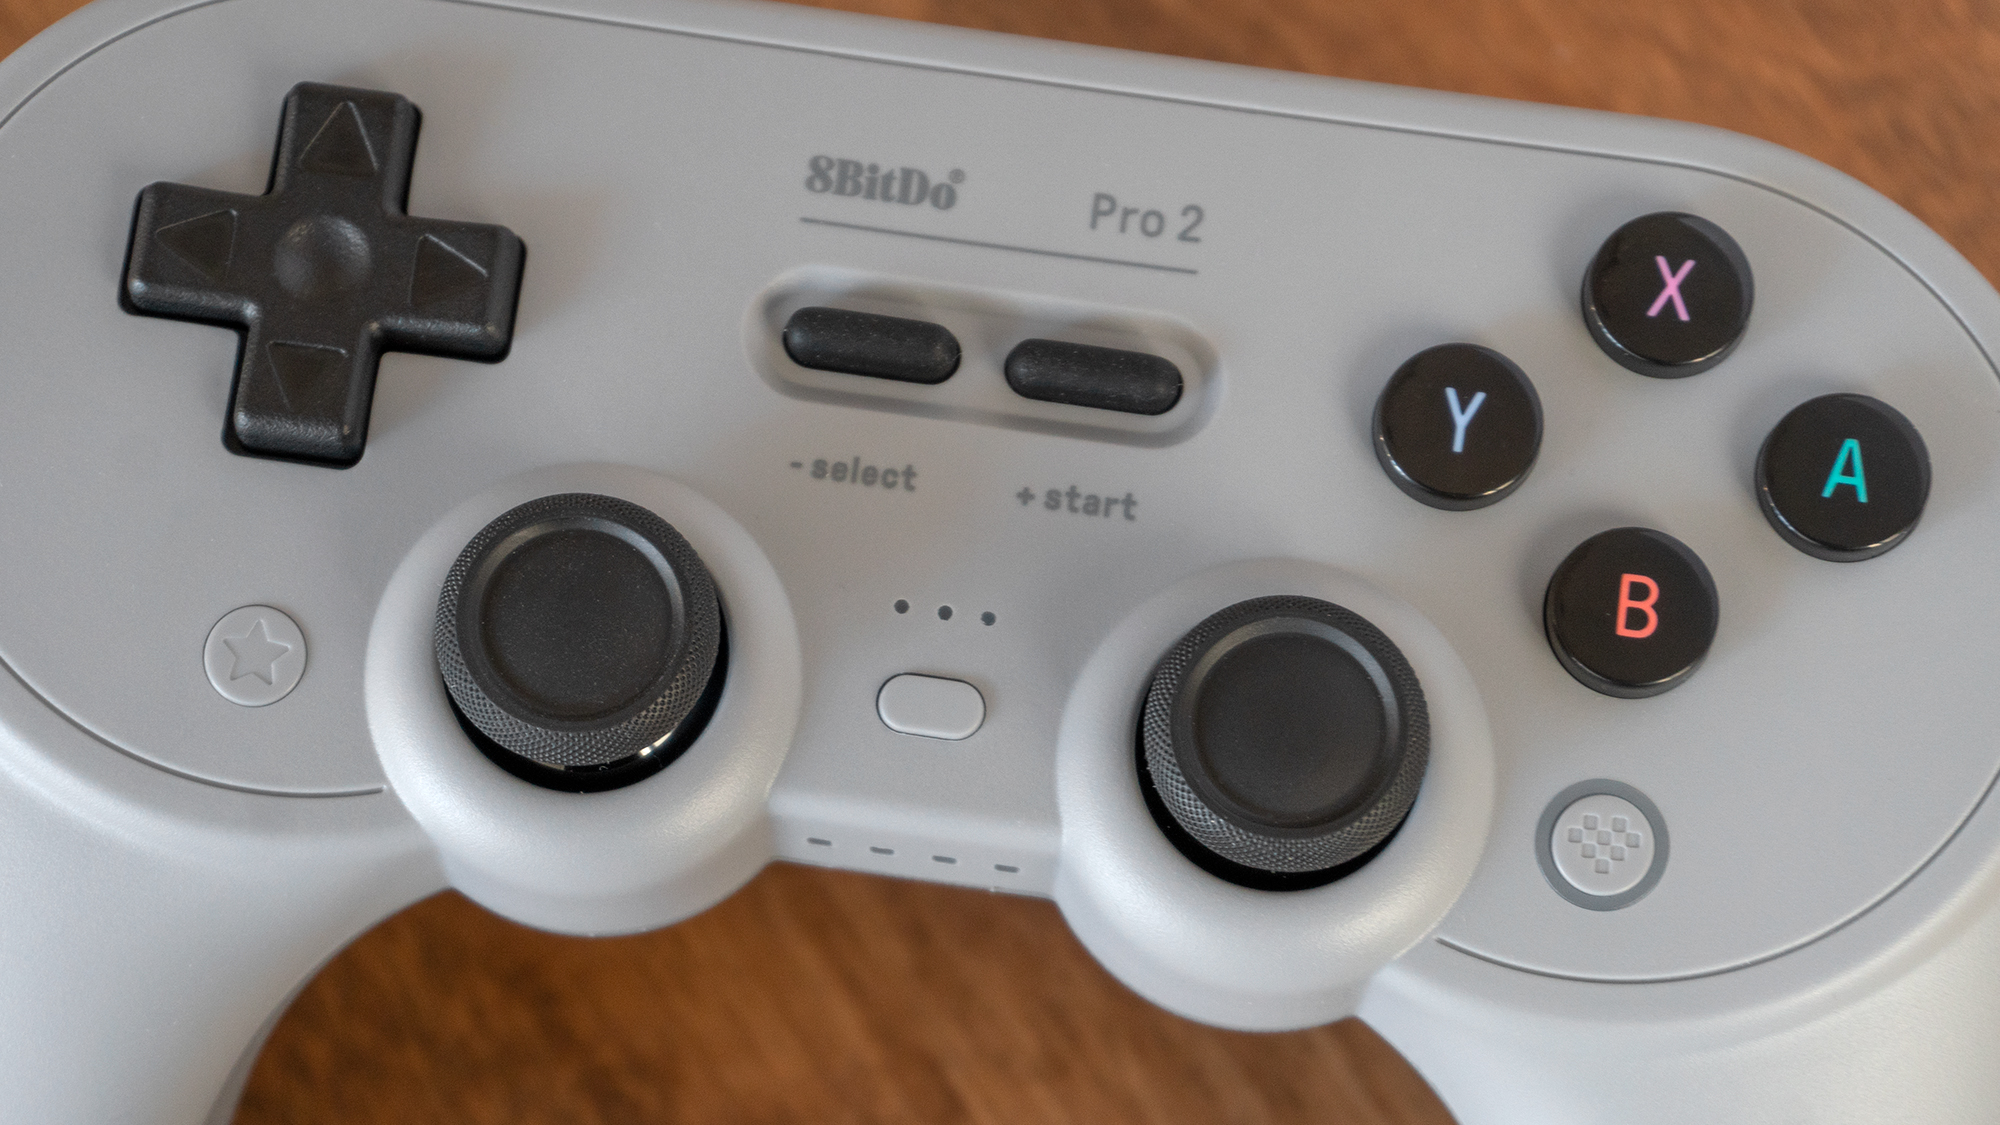 Three configuration profiles can be stored on the Pro 2 controller and switched using a new button, in addition to the controller's default settings, which can be applied at any time. (Photo: Andrew Liszewski/Gizmodo)